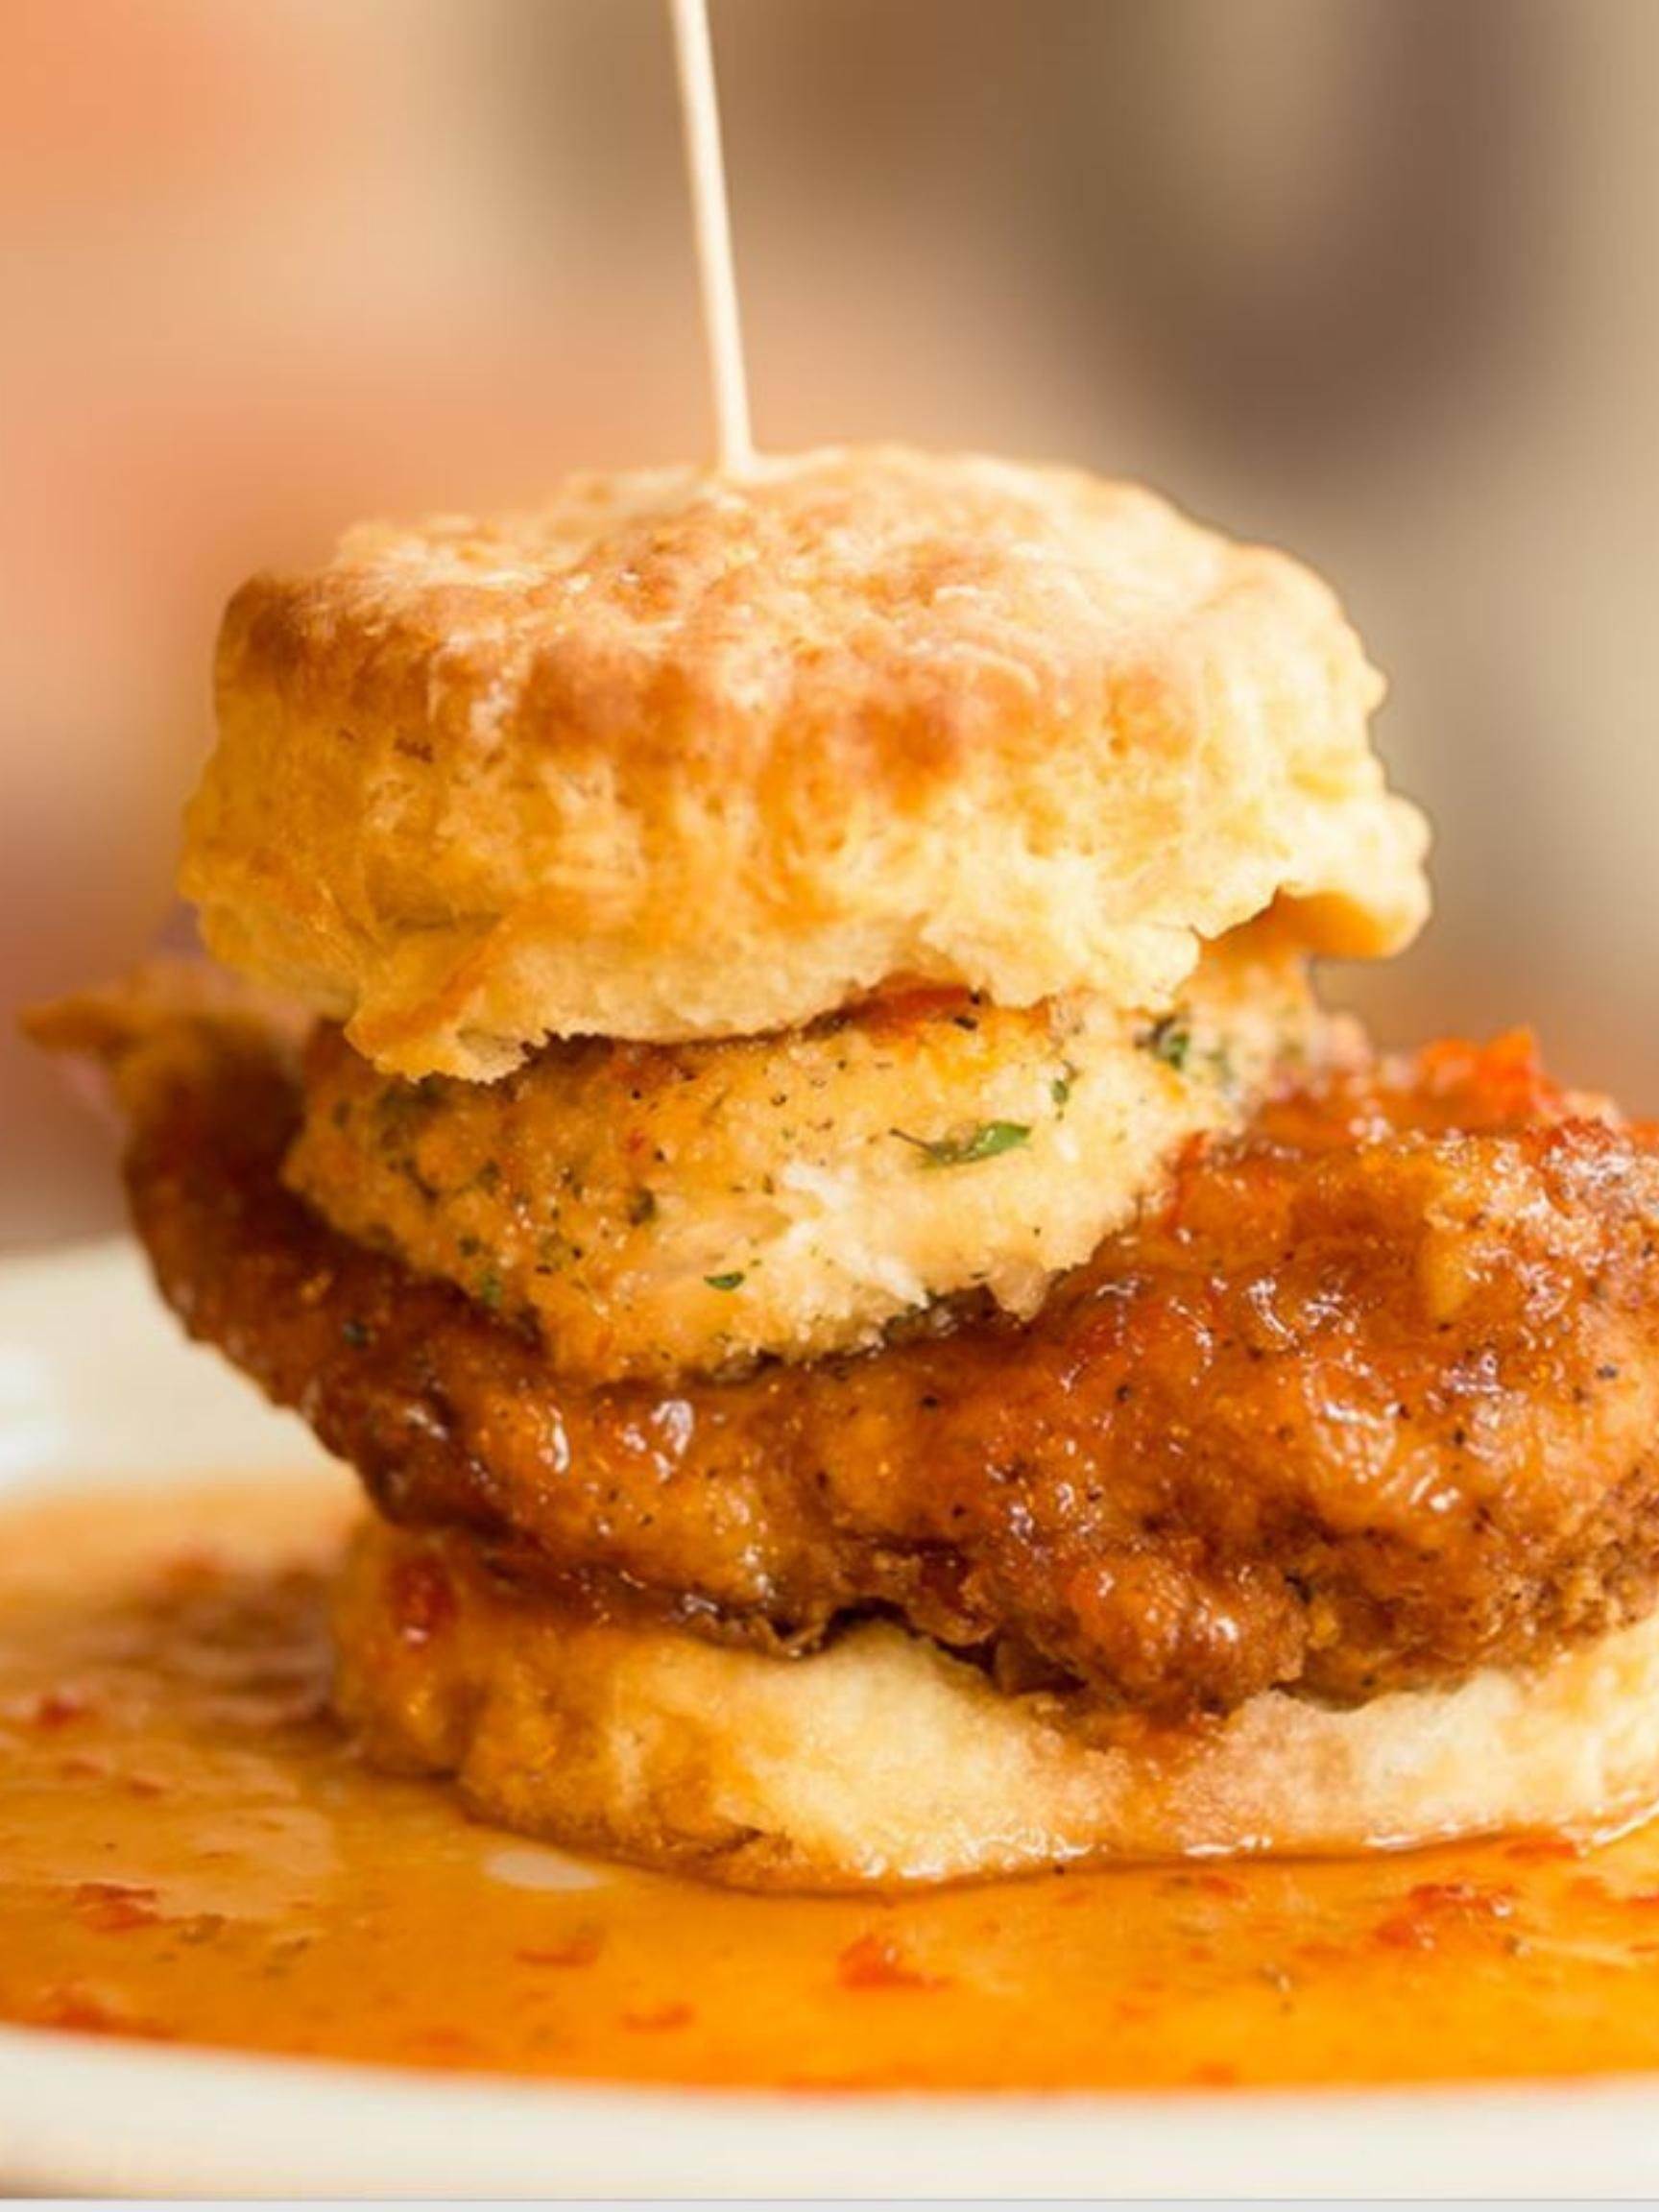 The Maple Street Biscuit Company